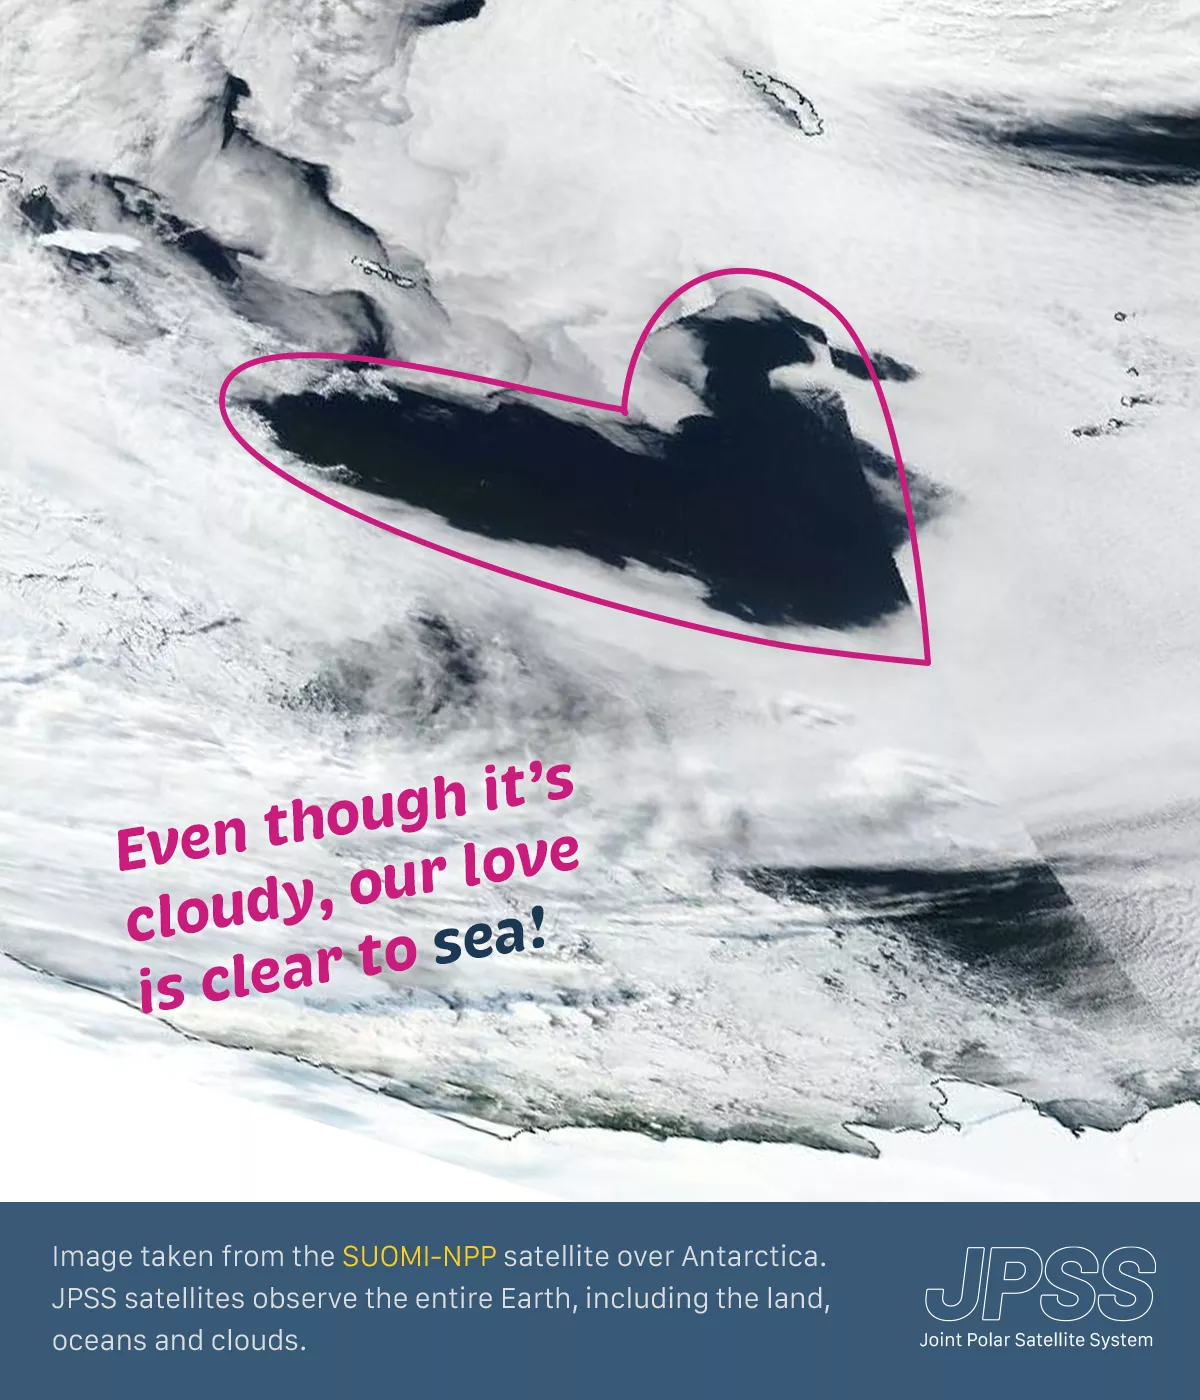 An image of a cloud formation seen over Antarctica, captured by the Suomi-NPP satellite, with a pink heart outline drawn around a cloud that resembles a heart shape. There's a playful caption that reads  “Even though it's cloudy, our love is clear to sea!” Below the image, there's a description that reads, “Image taken from the Suomi-NPP satellite over Antarctica. JPSS satellites observe the entire Earth, including the land, oceans and clouds.” The Joint Polar Satellite System (JPSS) wordmark is placed in t